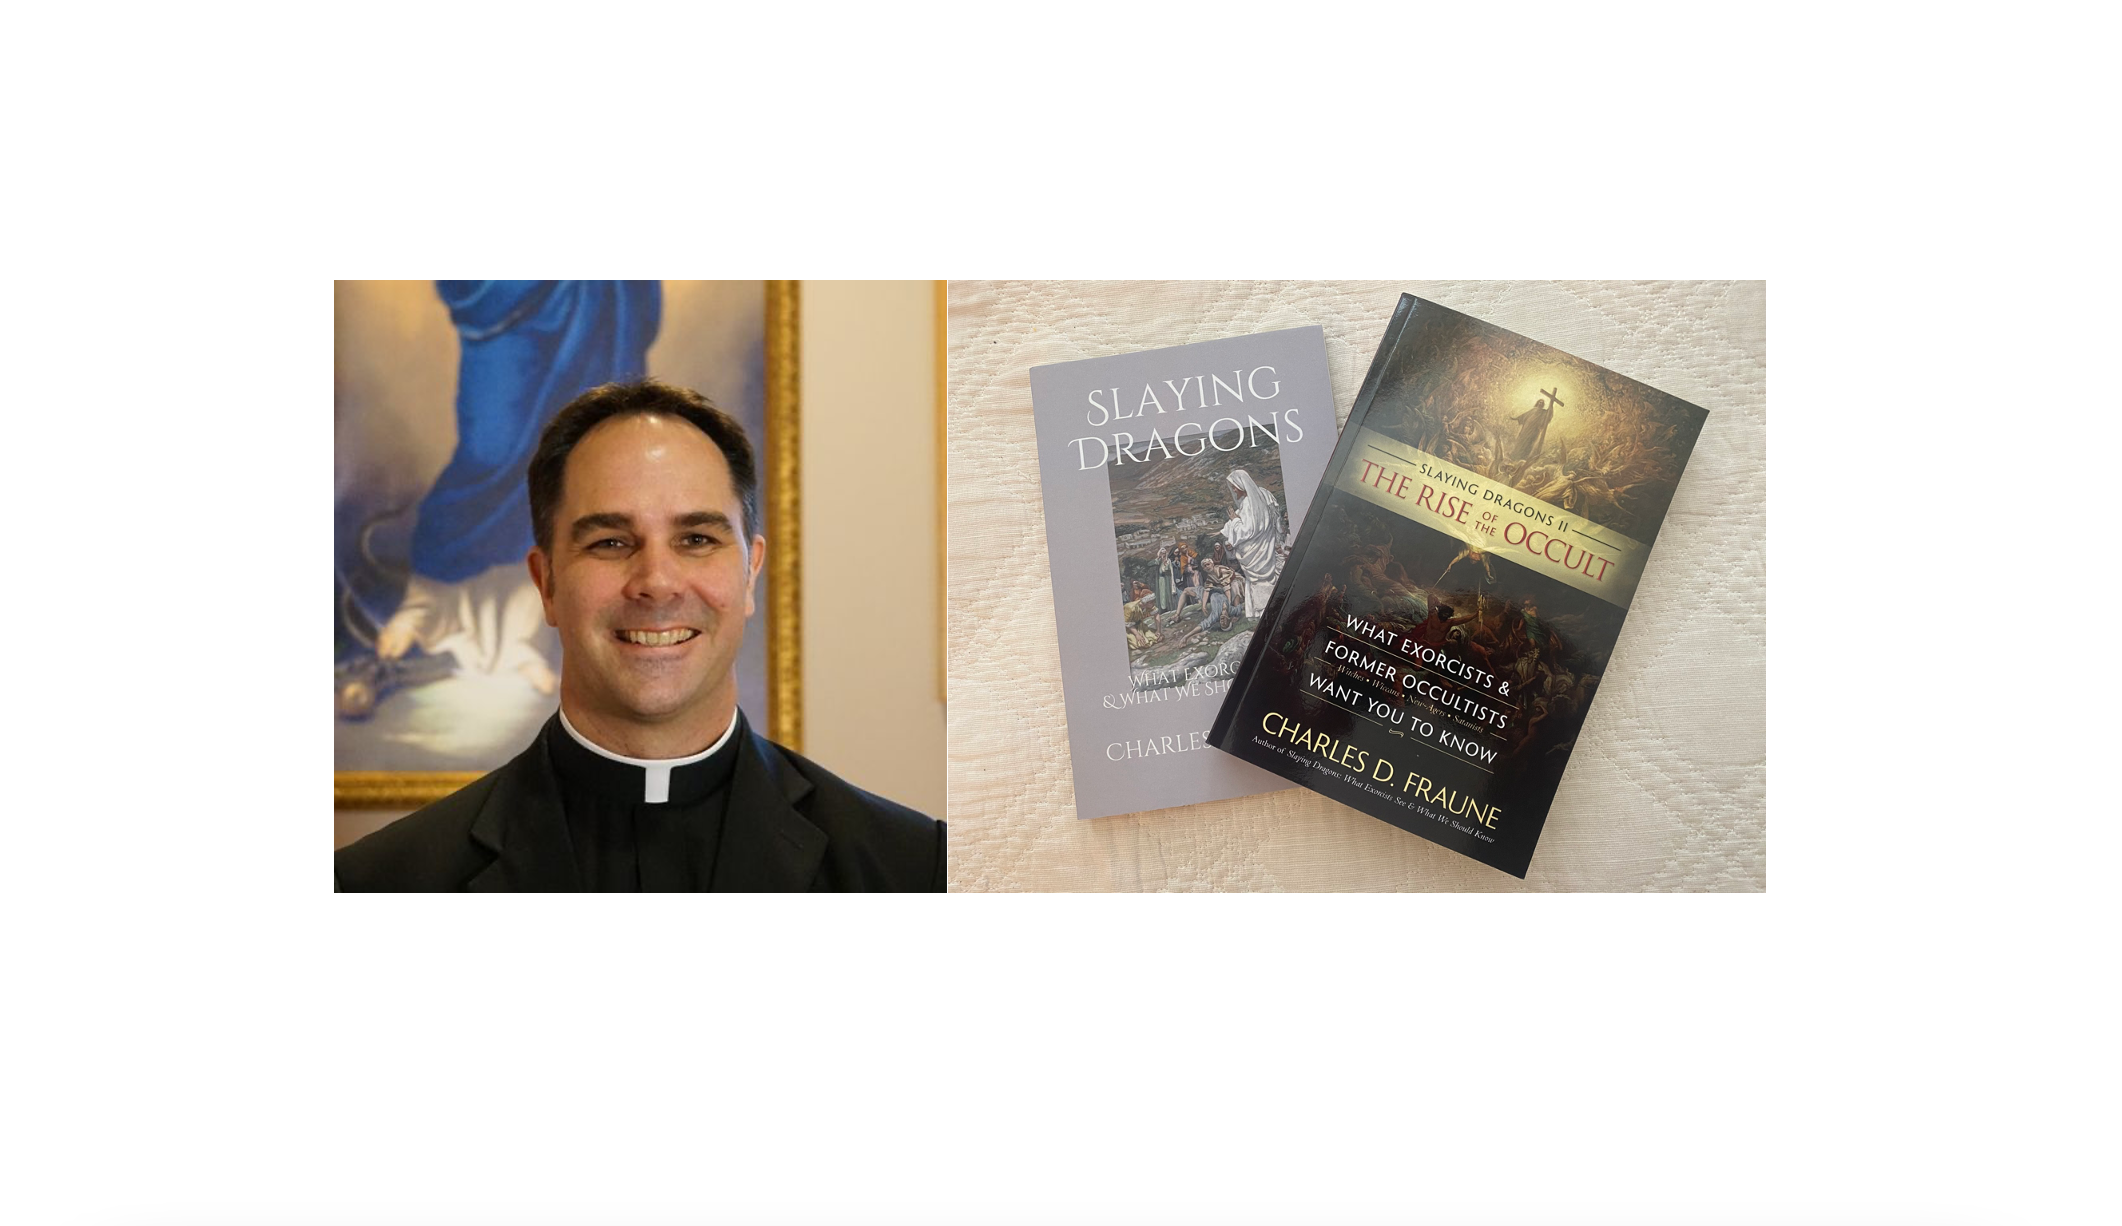 New Endorsement for "The Rise of the Occult"! Fr. Donald Calloway